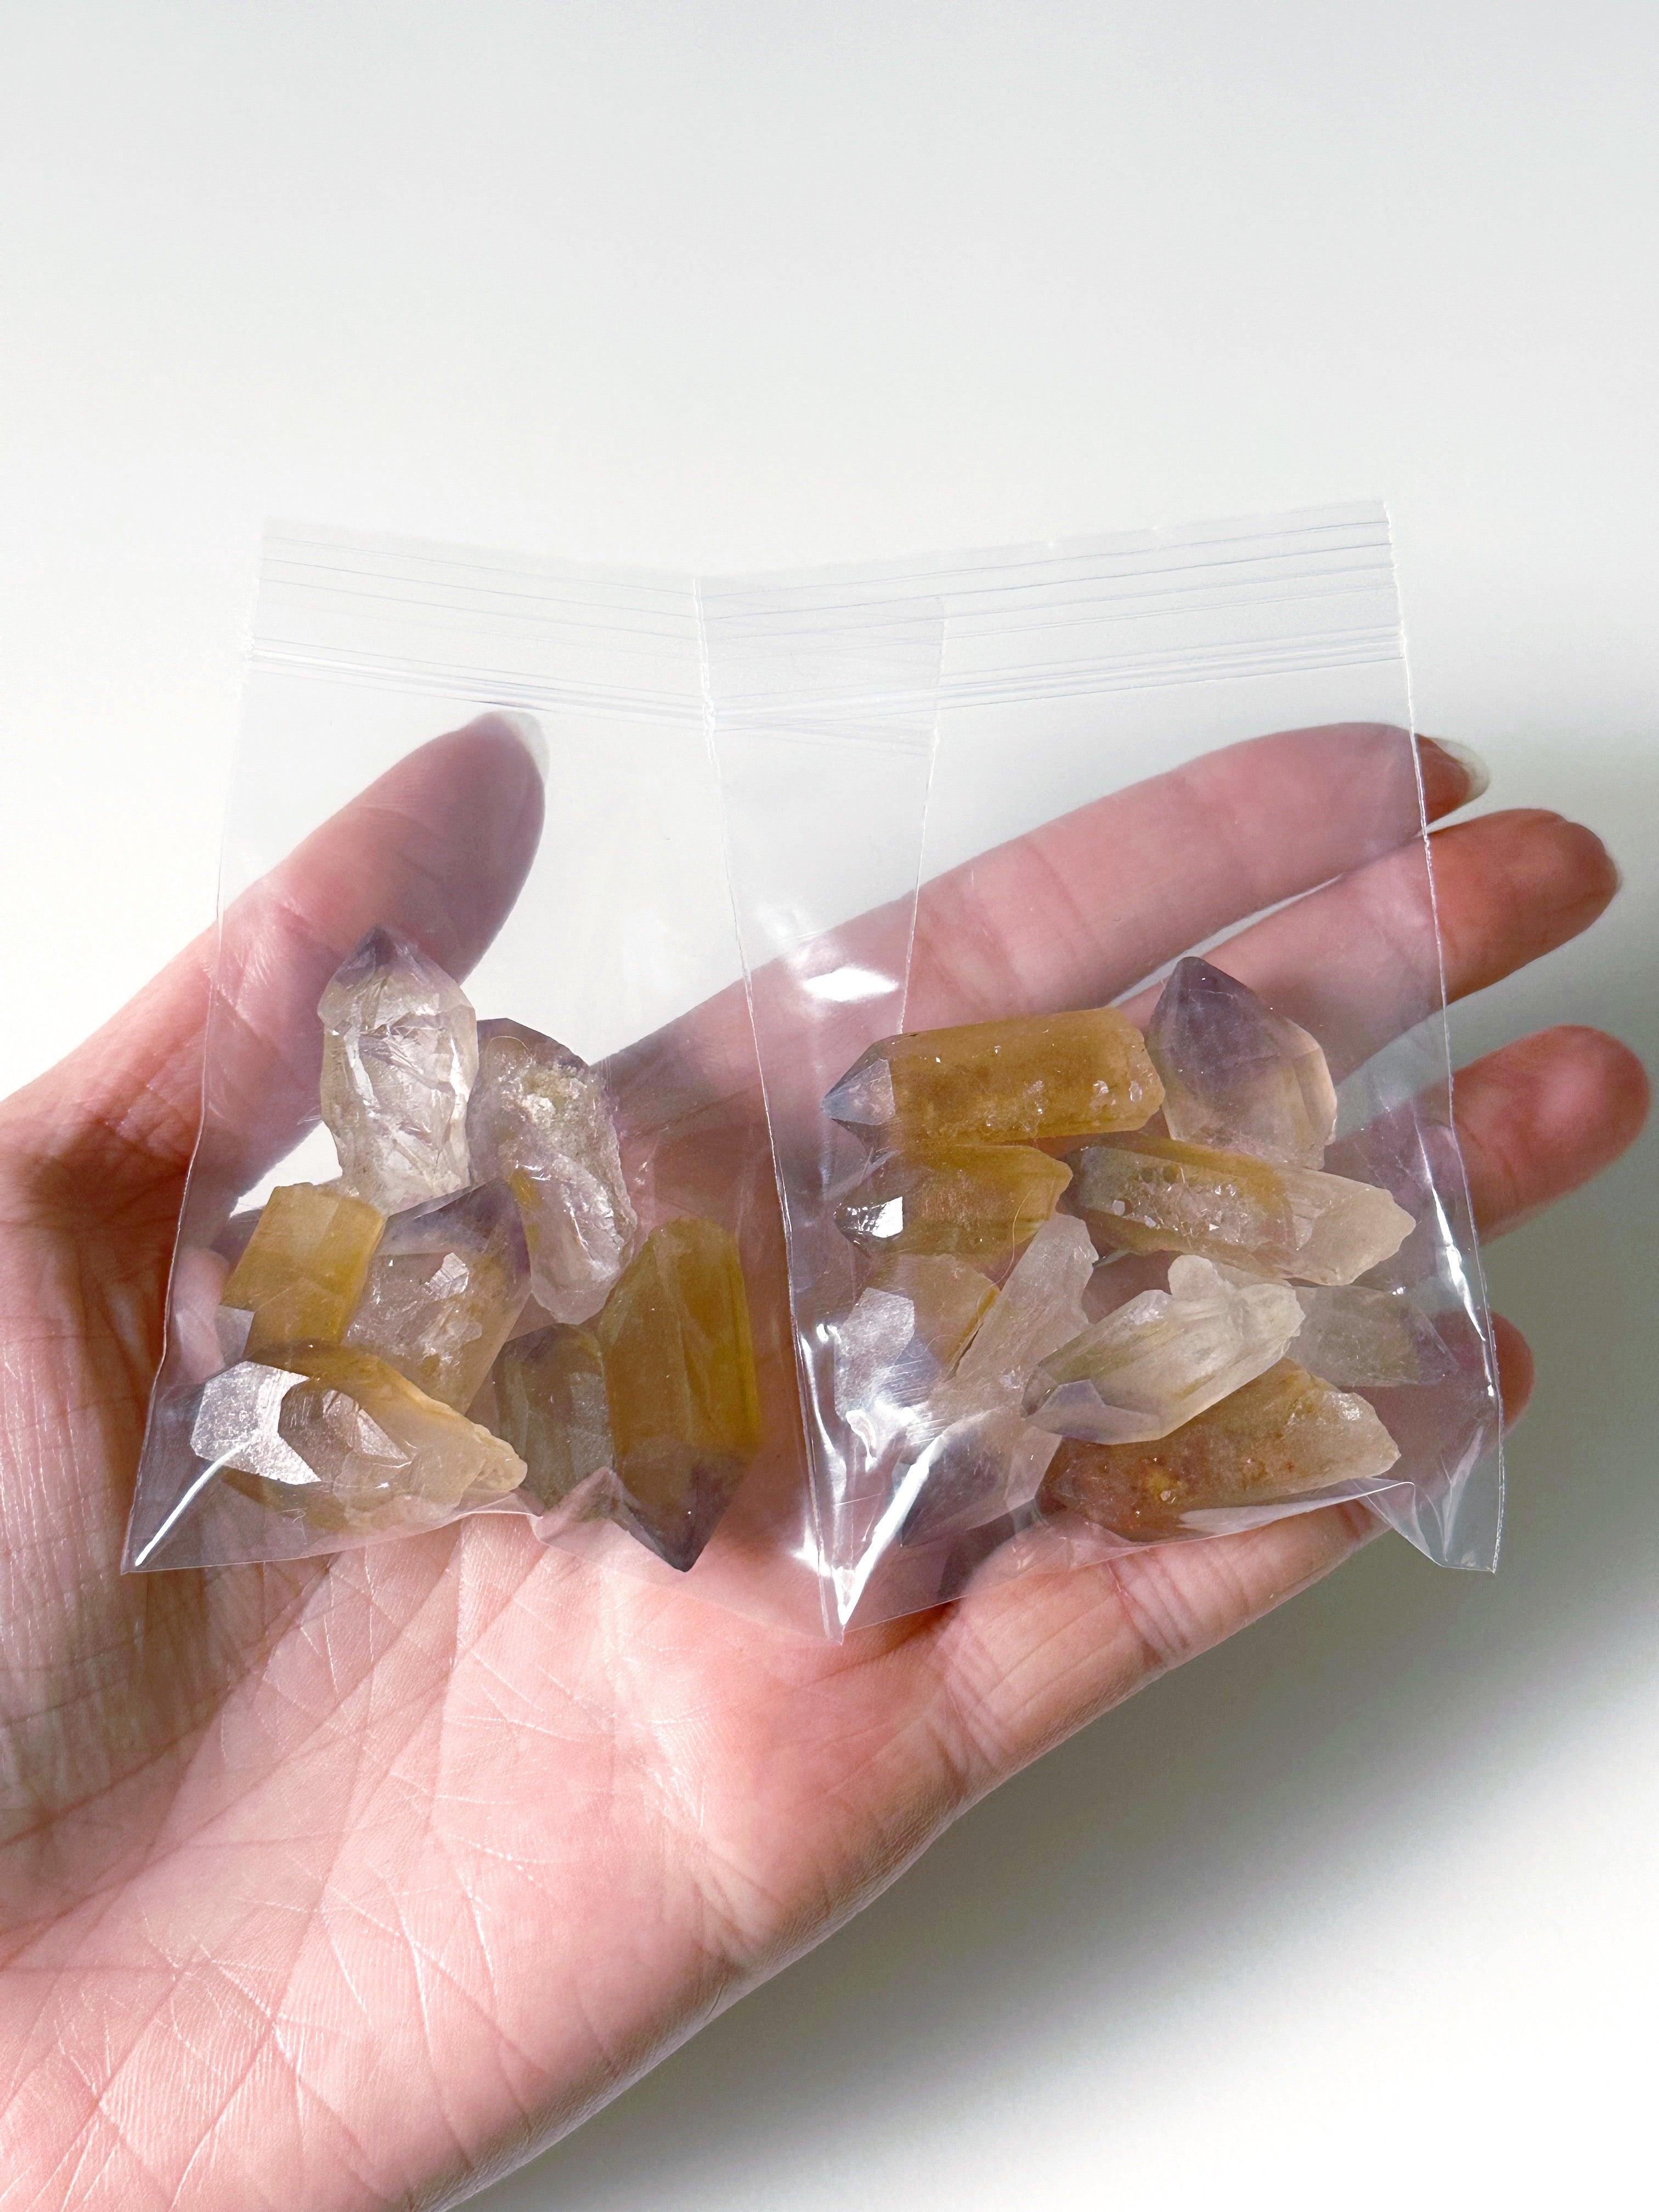 GOLDEN AMETHST BAGGIE (30G) - 33 bday, amethyst, emotional support, golden amethyst, holiday sale, raw crystal, raw point, raw stone, recently added - The Mineral Maven